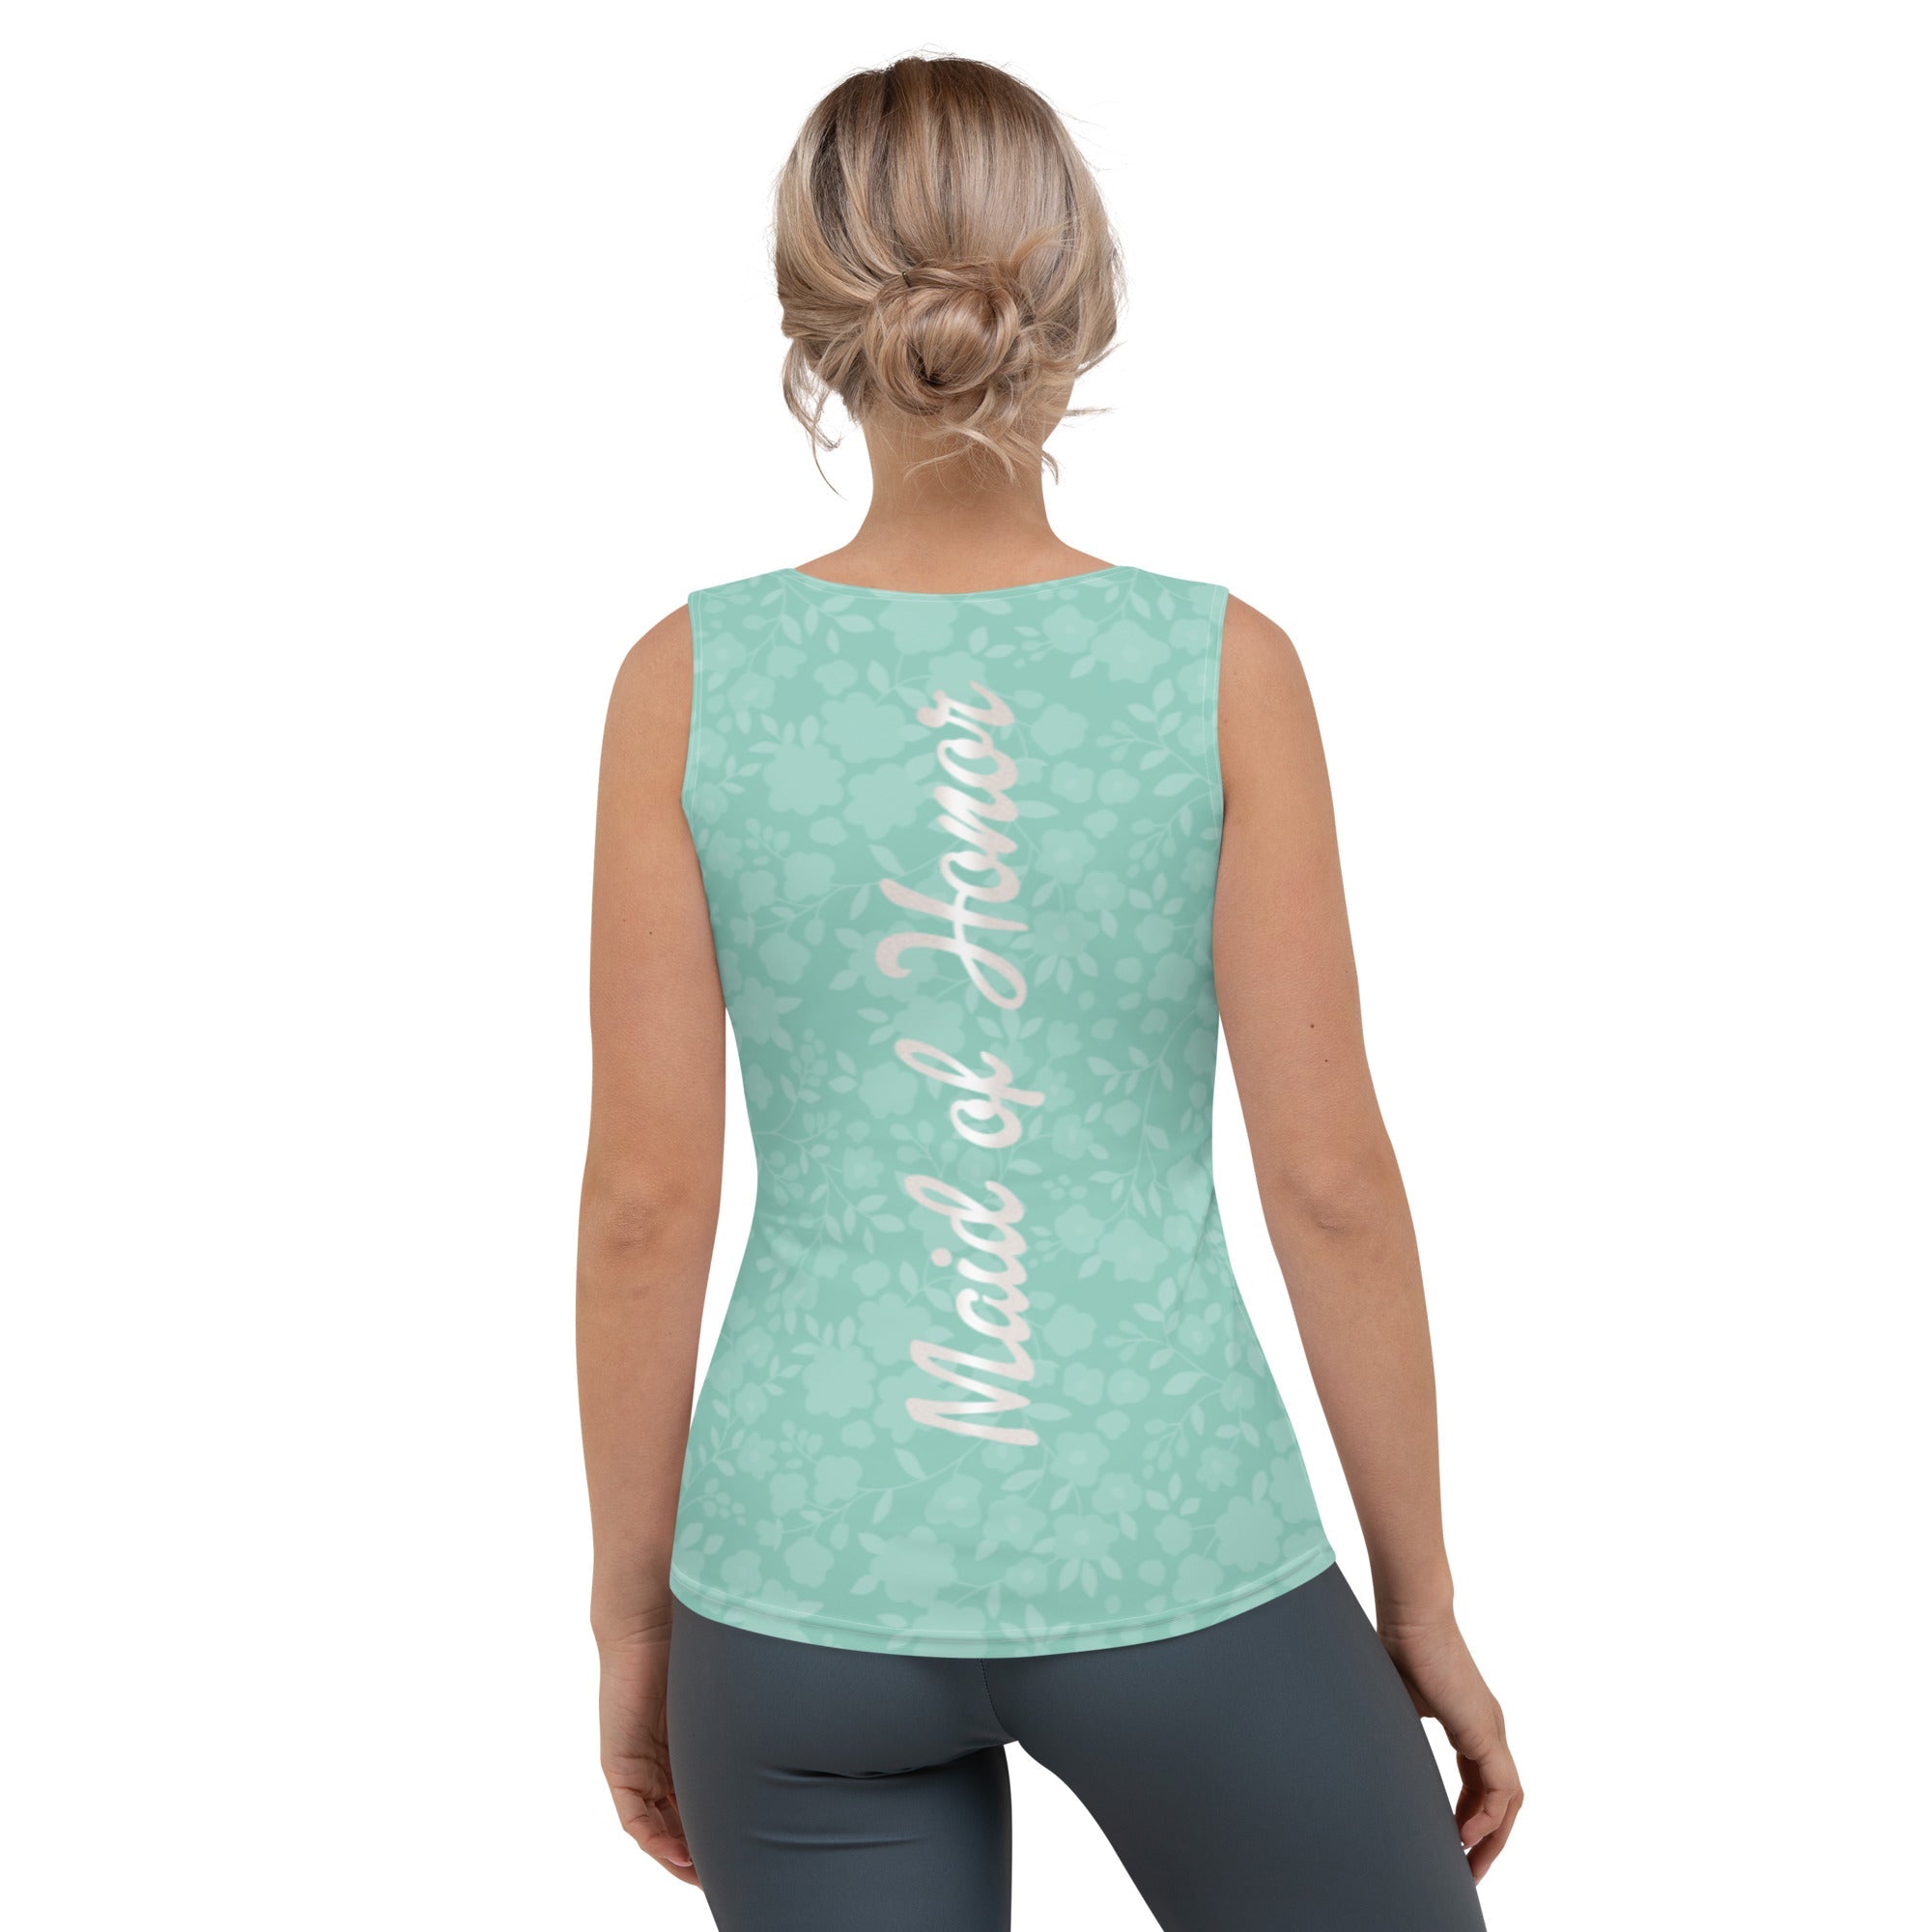 Maid of Honor Tank Top